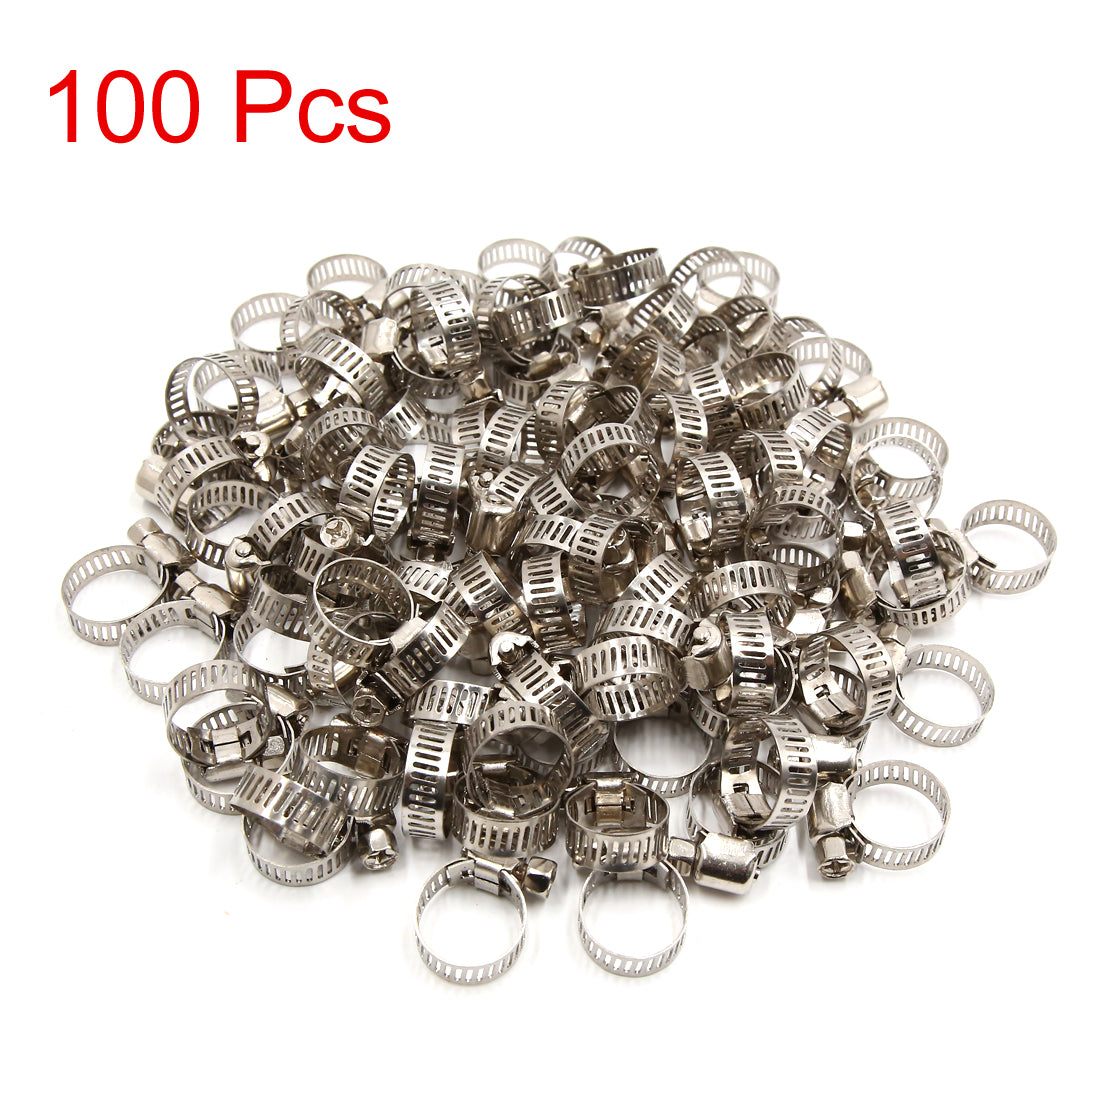 uxcell Uxcell 100 Pcs Car Metal Adjustable 13-19mm Drive Hose Clamp Fuel Line Pipe Tube Tight Clip